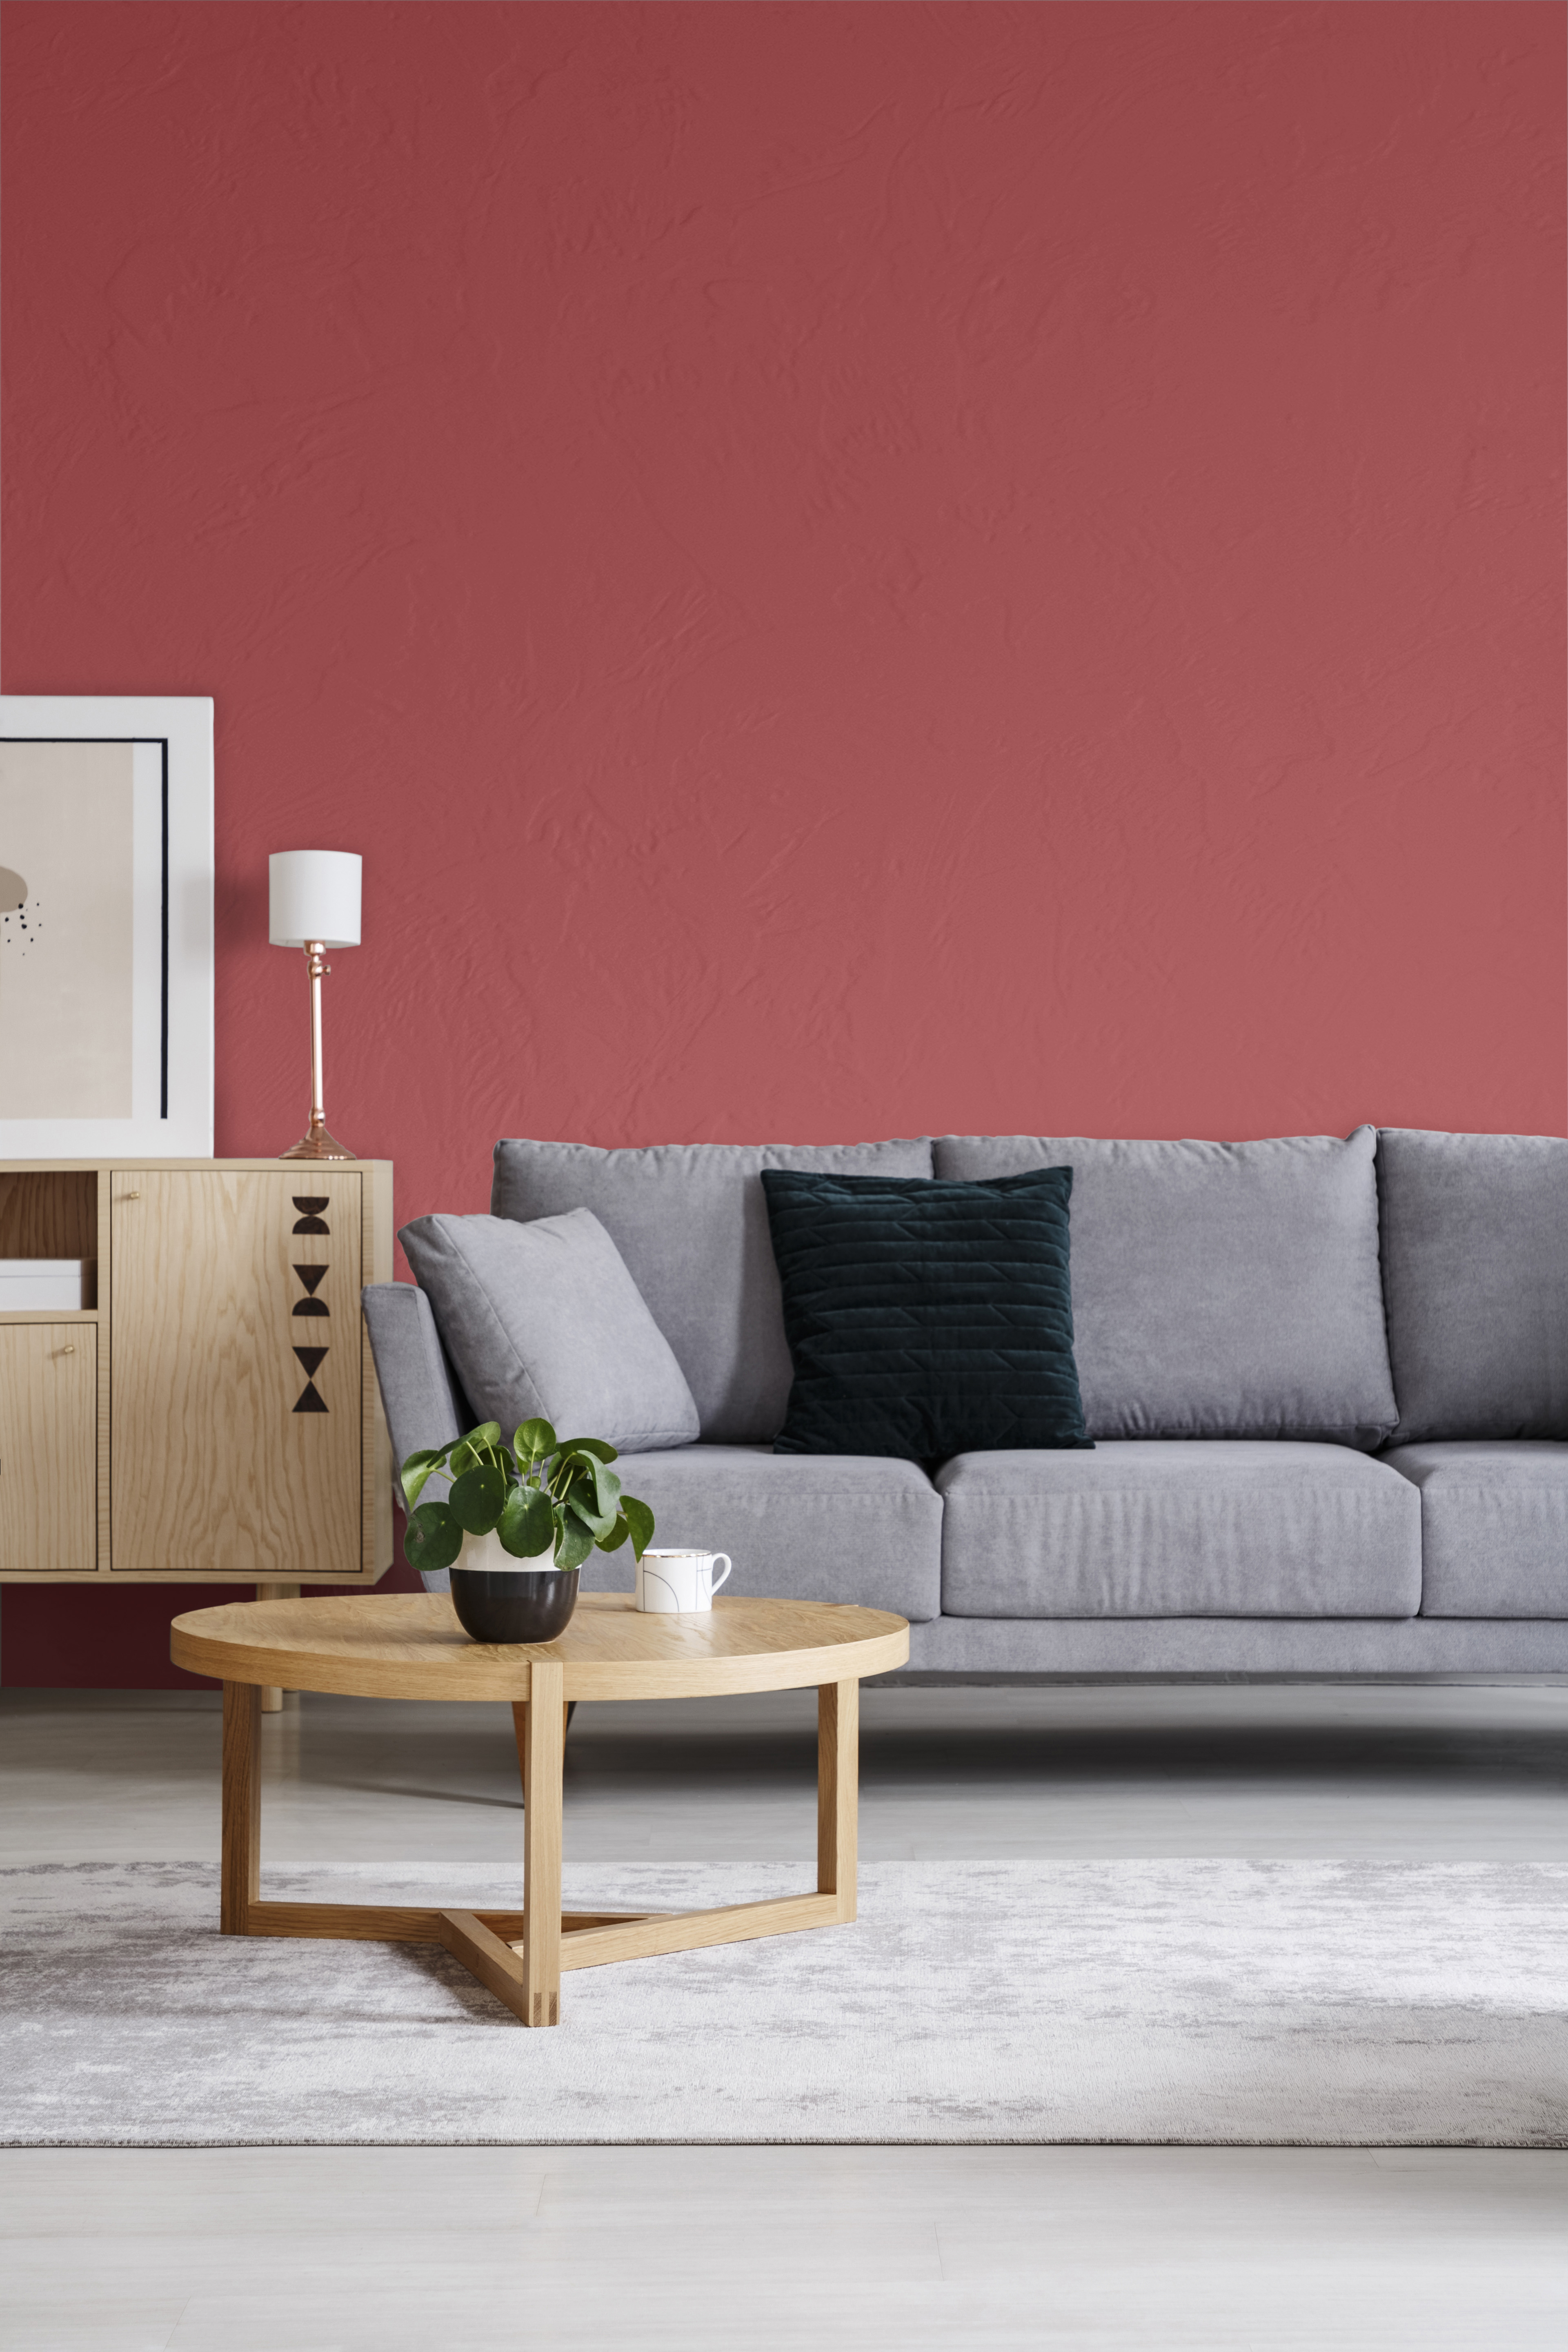 A red wall in an elegant living room interior with a sofa and round table, the color used on the wall is called Lingonberry Punch. 